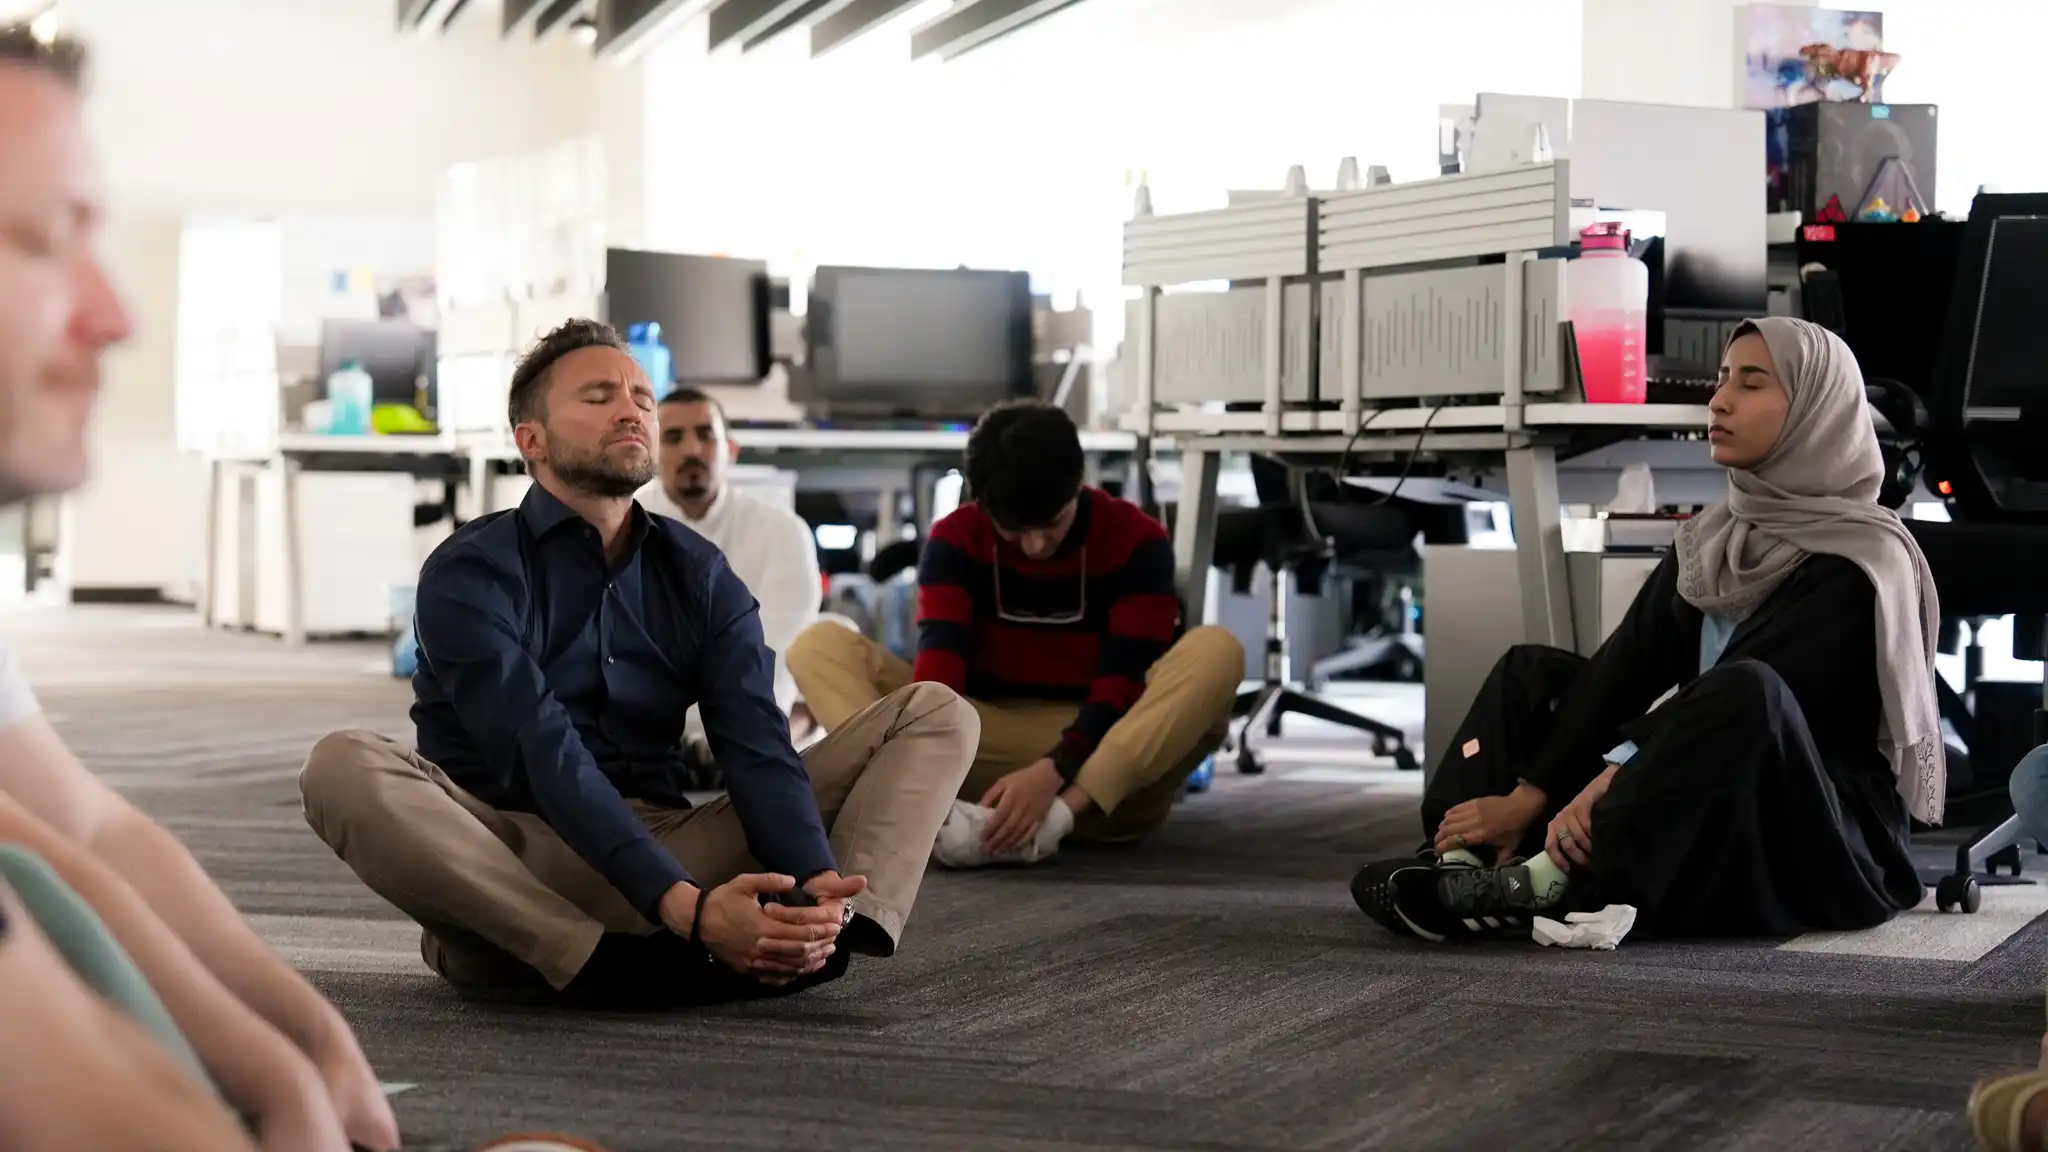 staff members sitting cross legged on the floor with their eyes closed and relaxed postures